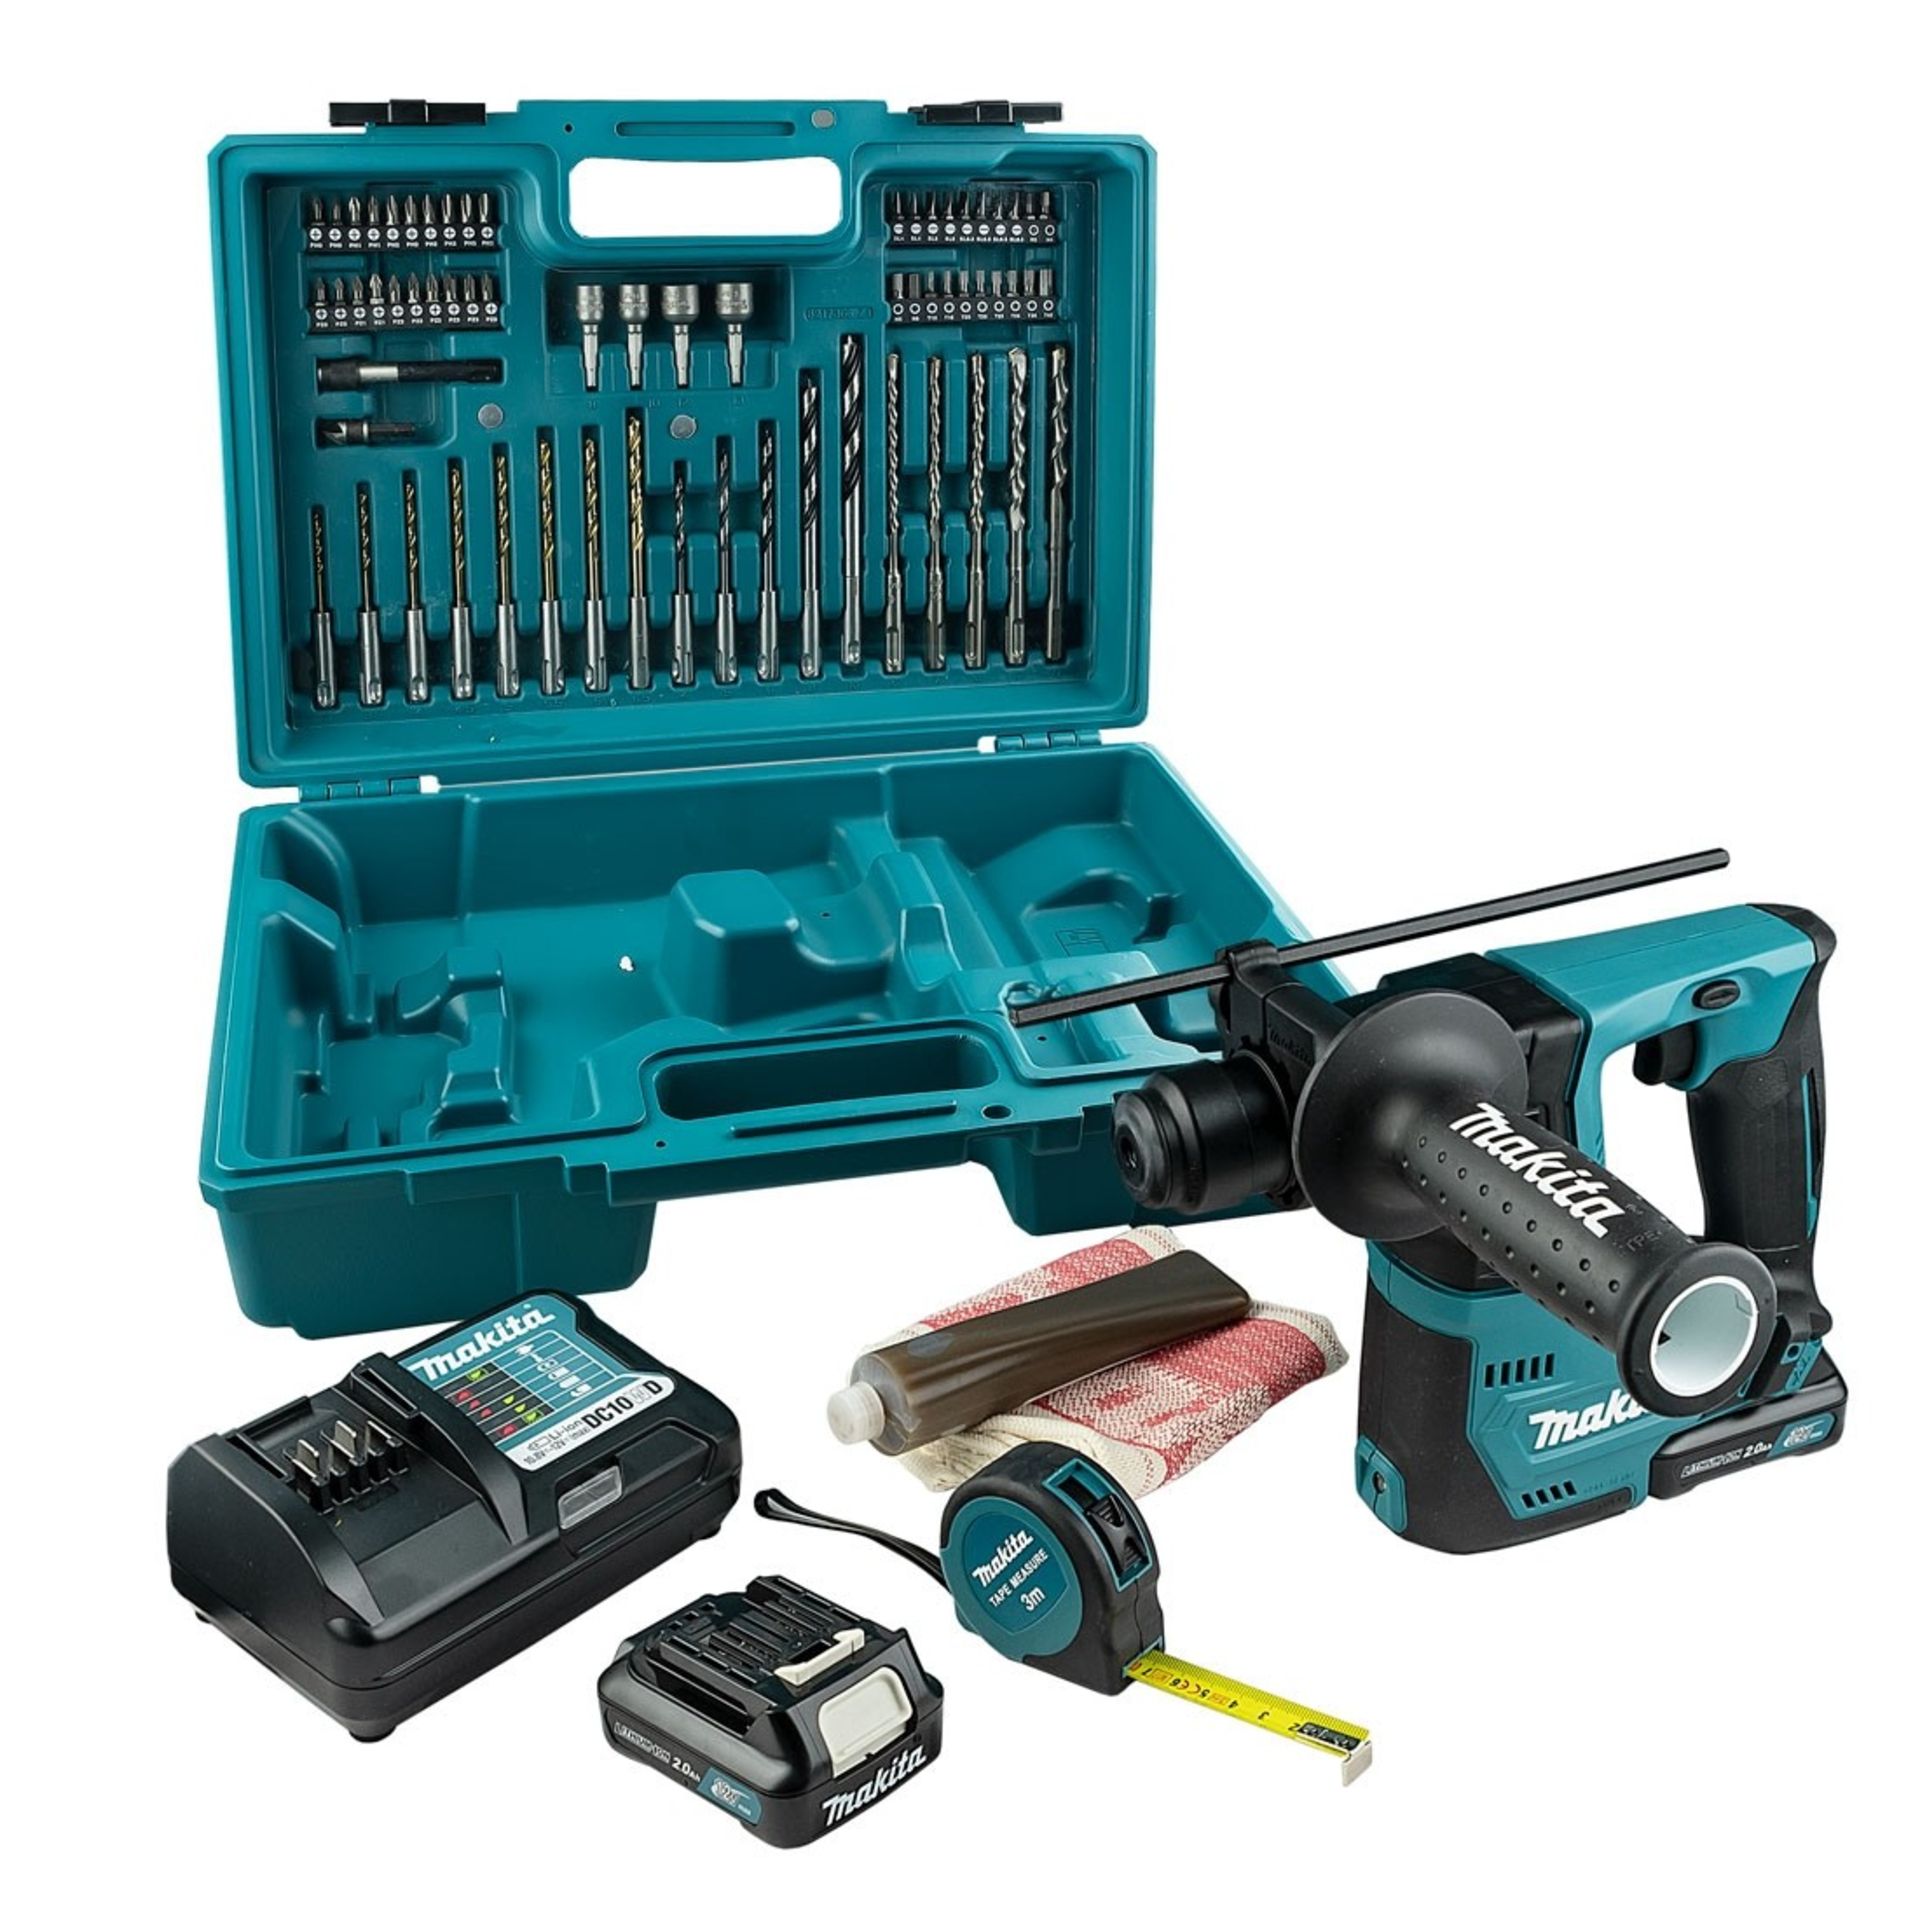 V Brand New Makita Cordless Rotary Hammer Drill - 12v - Two Batteries - Charger Plus 65 Piece